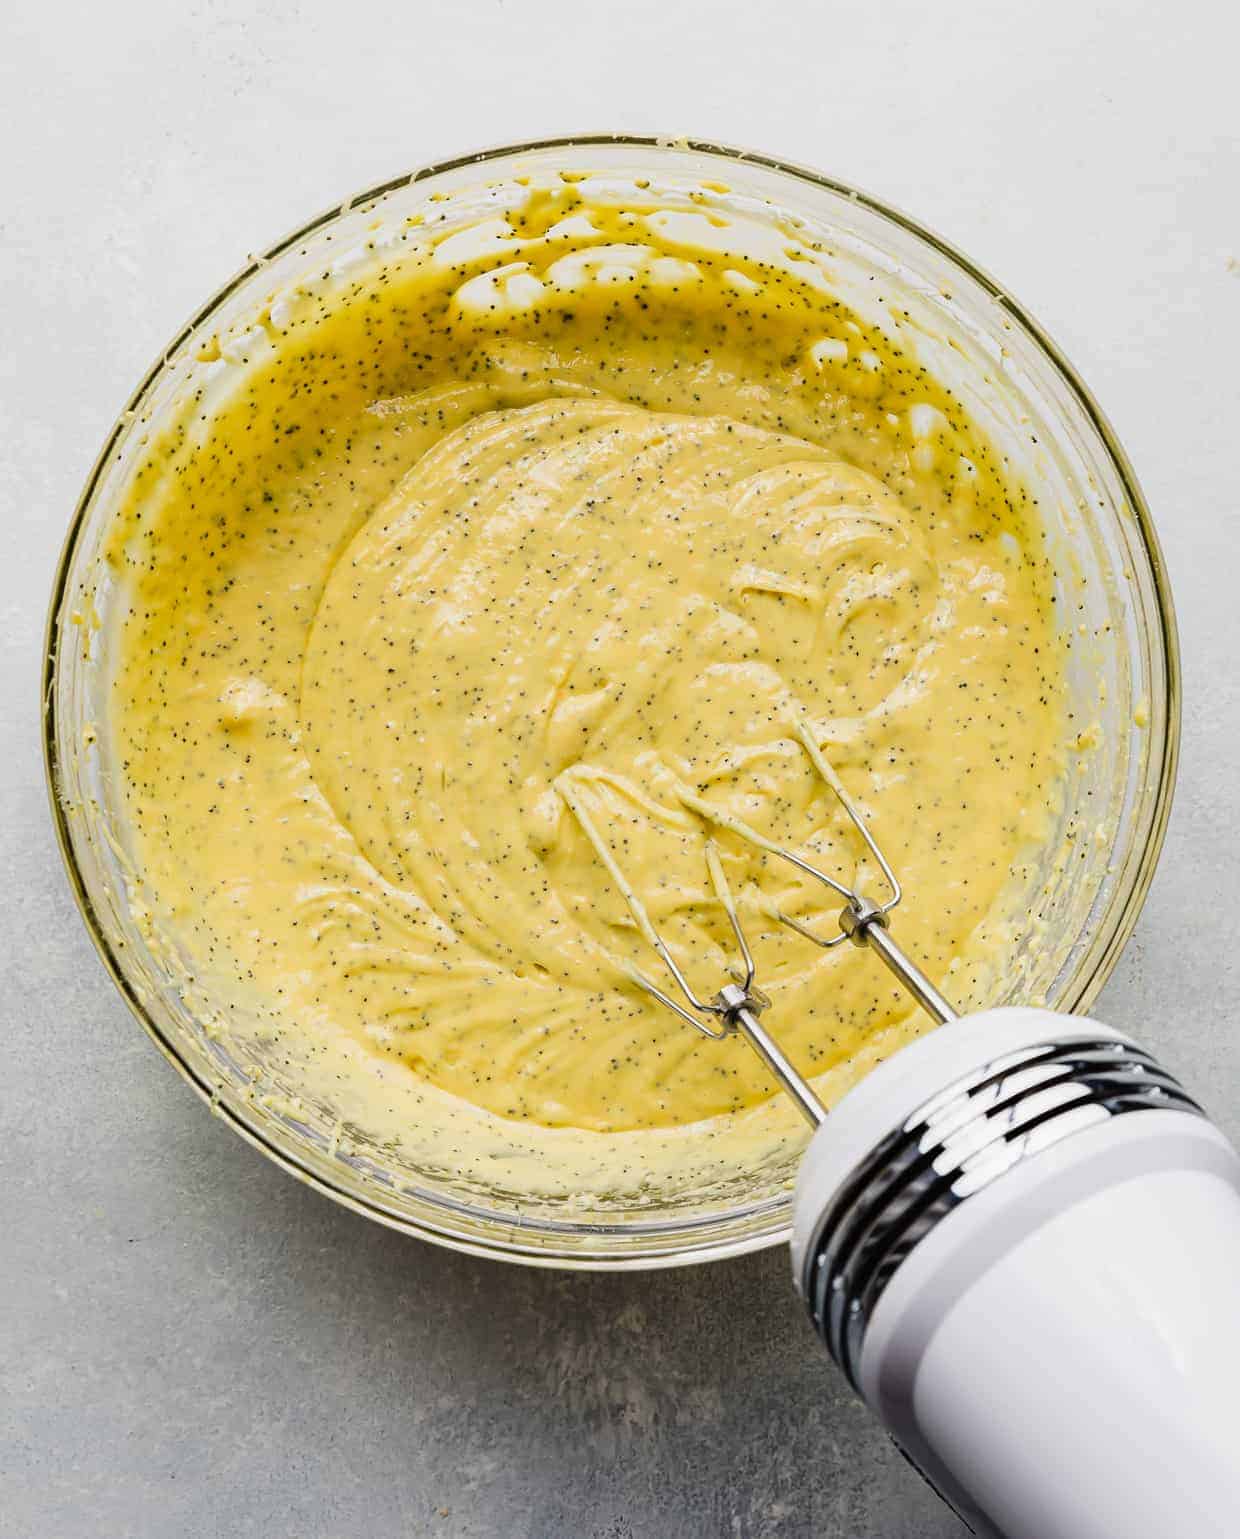 Lemon Poppy Seed Bread batter in a large glass bowl against a white background.